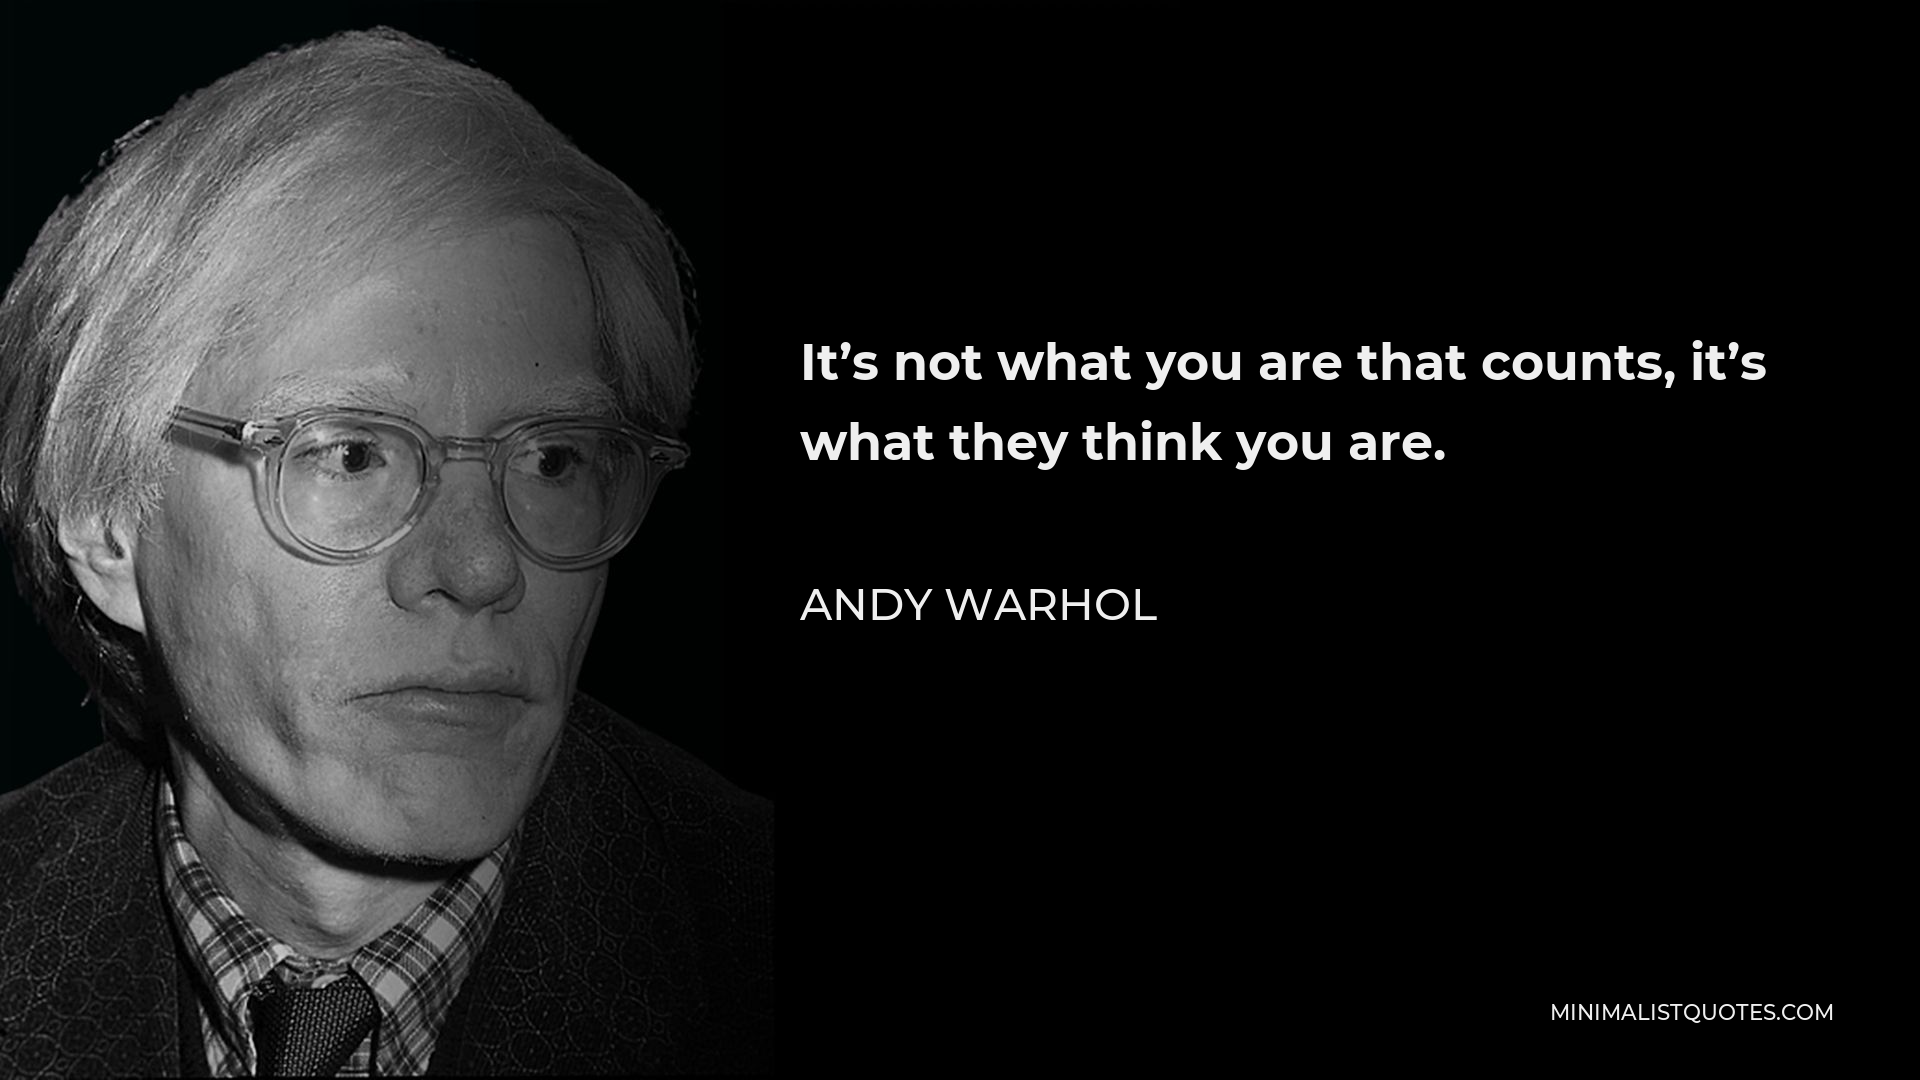 Andy Warhol Quote - It’s not what you are that counts, it’s what they think you are.